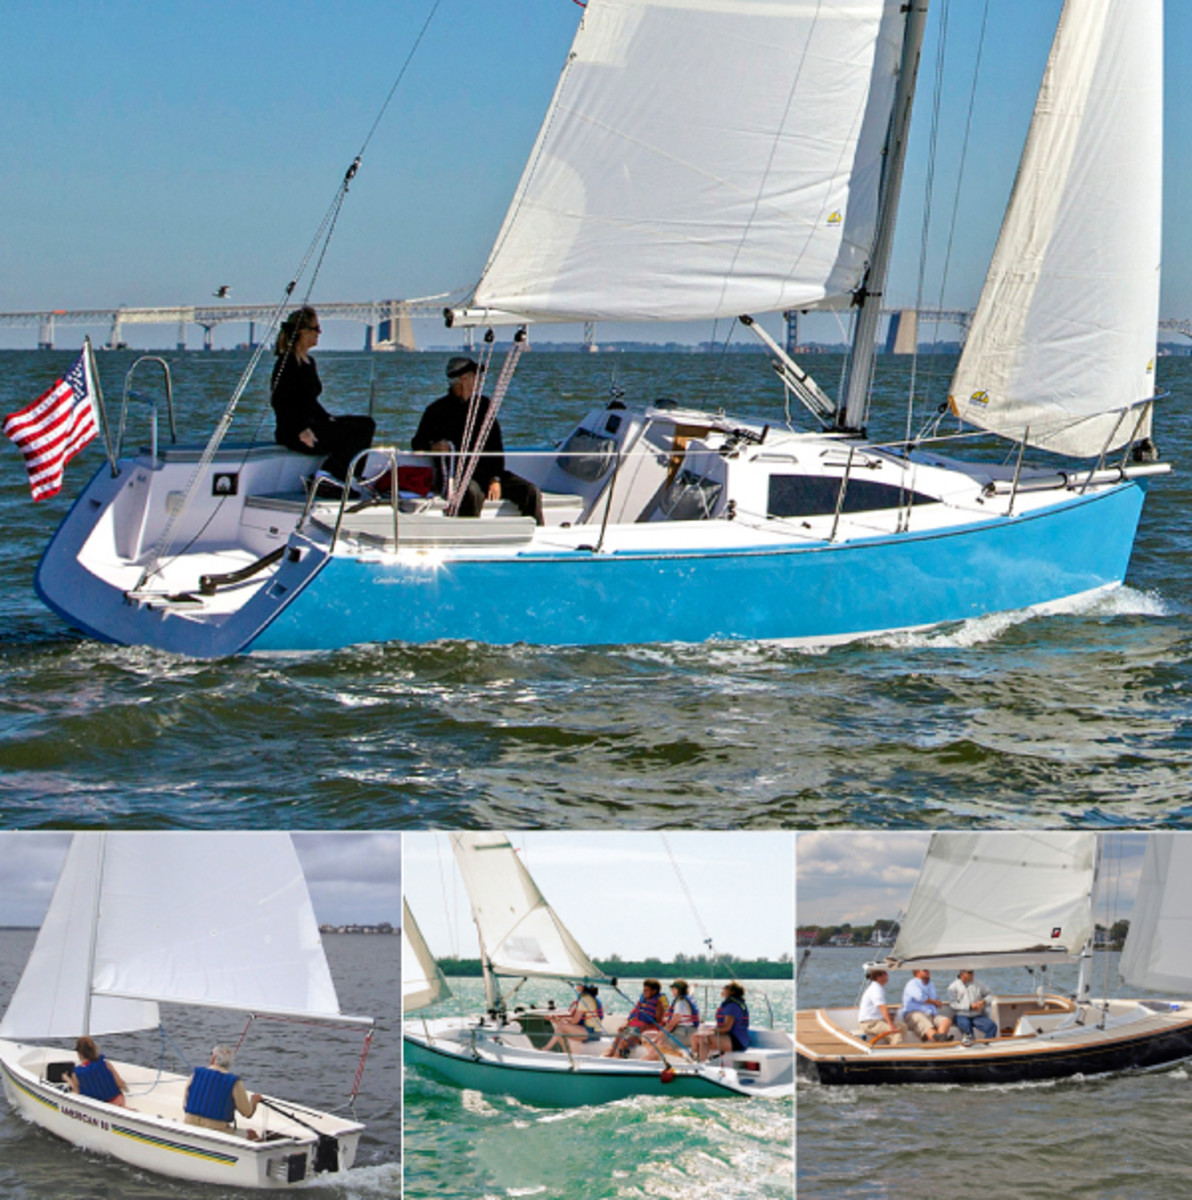 Speed, comfort, safety and an easy-to-handle rig are all the hallmarks of a great daysailer: (clockwise from top) the Catalina 275 Sport, Tartan Fantail, Colgate 26 and American 18 